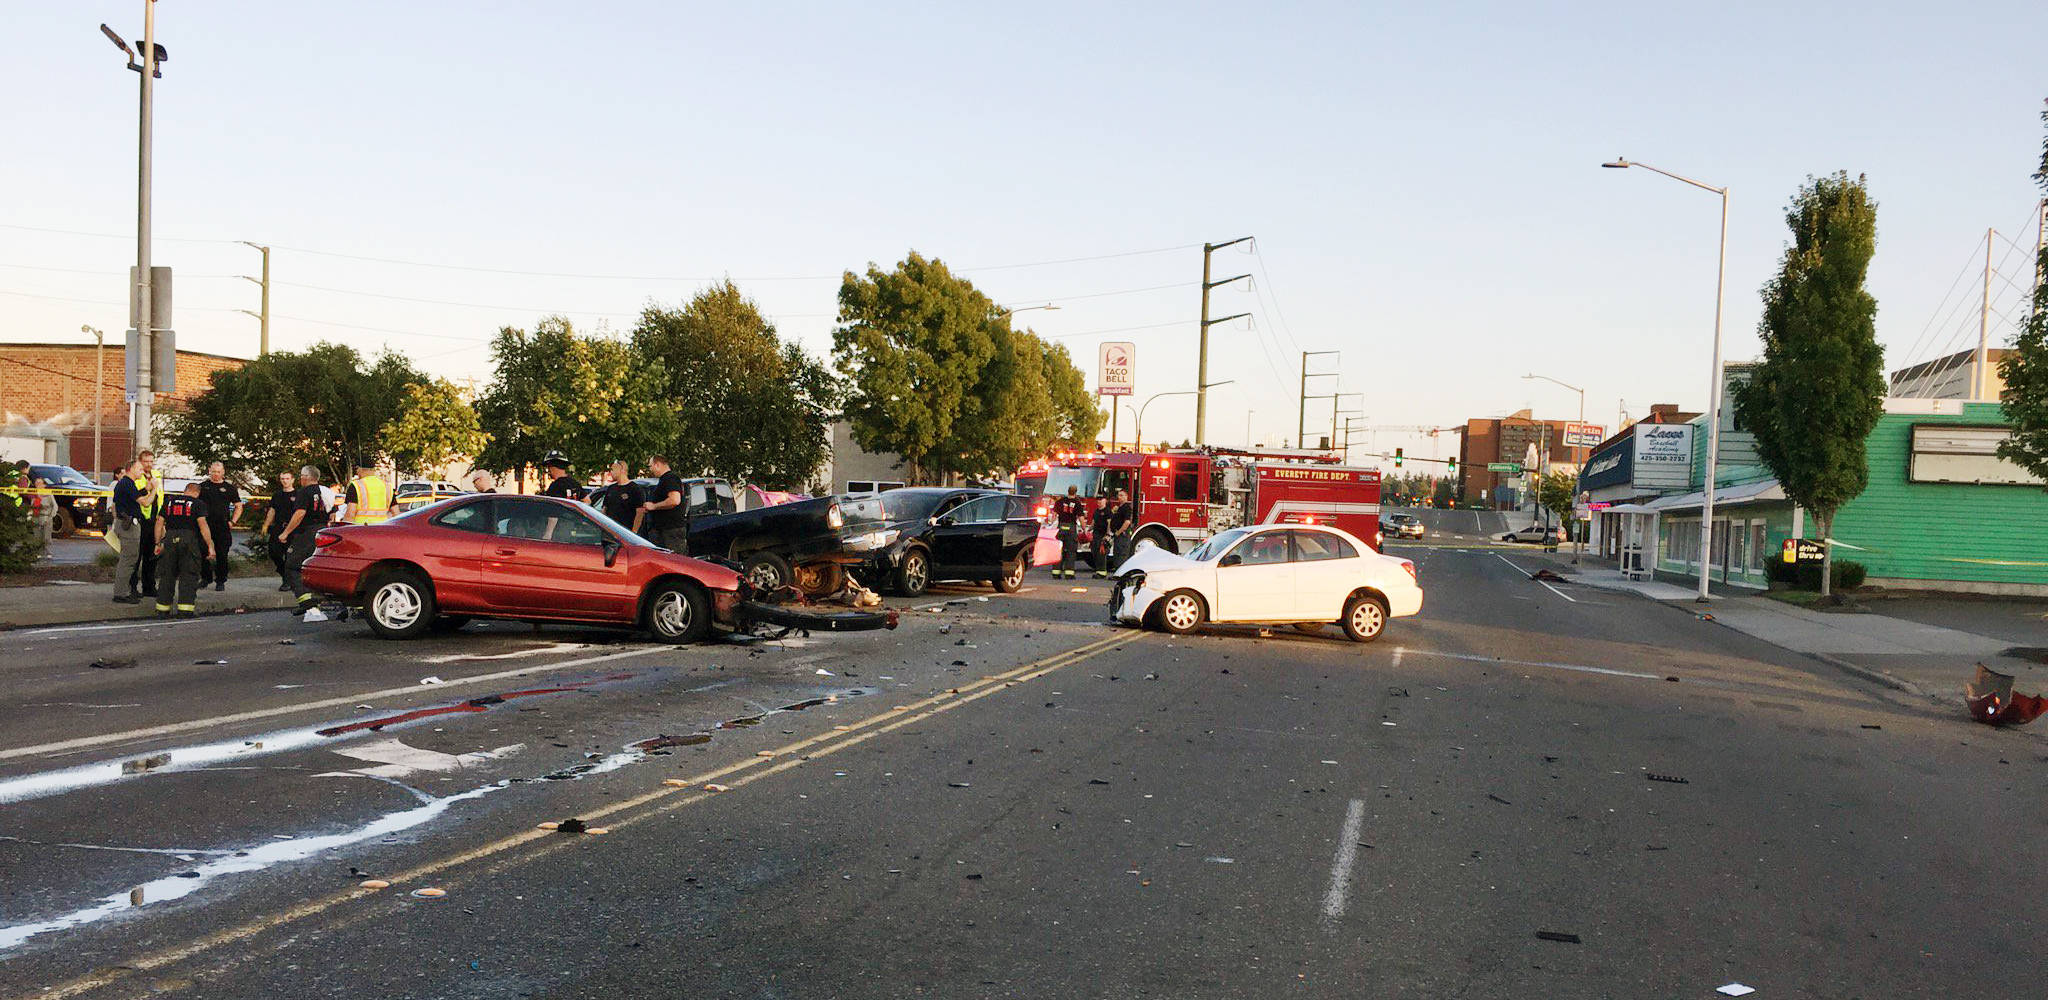 Eight people were injured July 22 in a six-vehicle collision on Broadway in north Everett. (Everett Police Department, file)